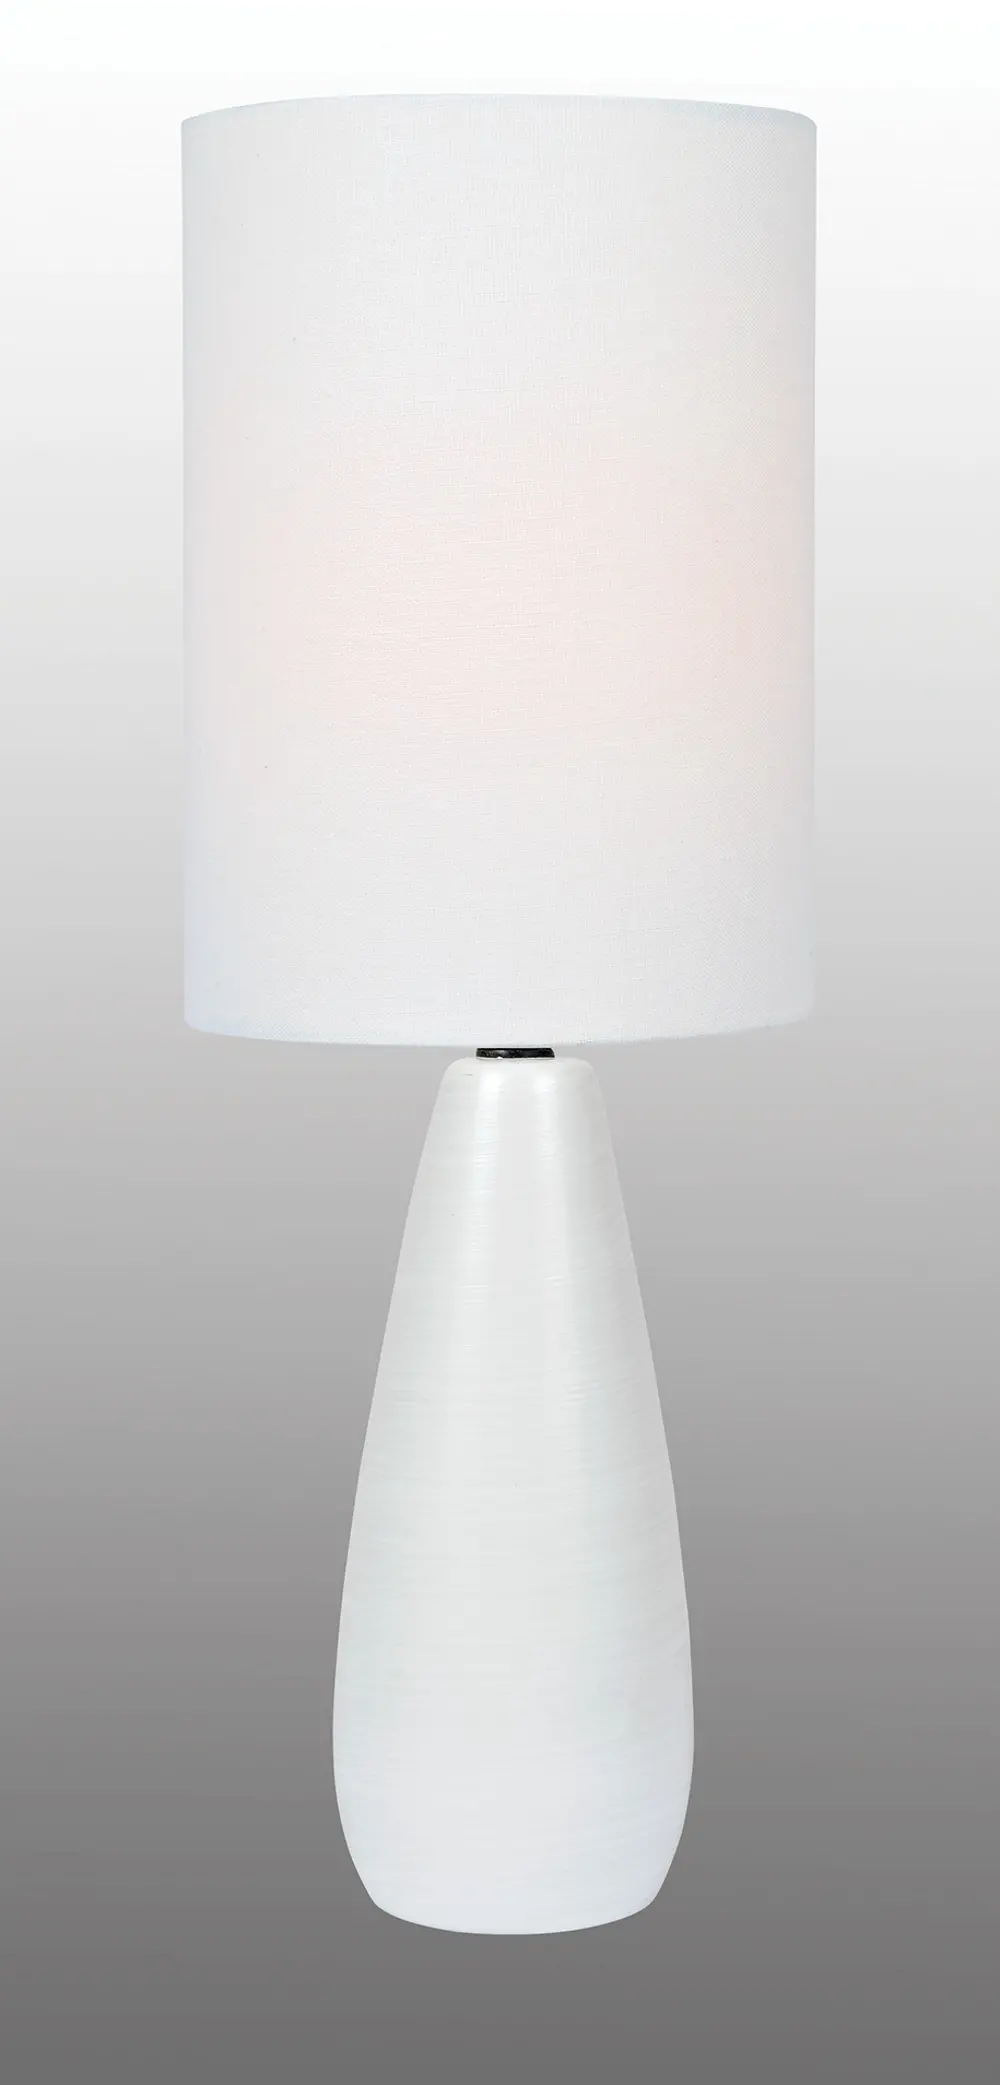 White Modern Table Lamp with White Shade - Quatro-1